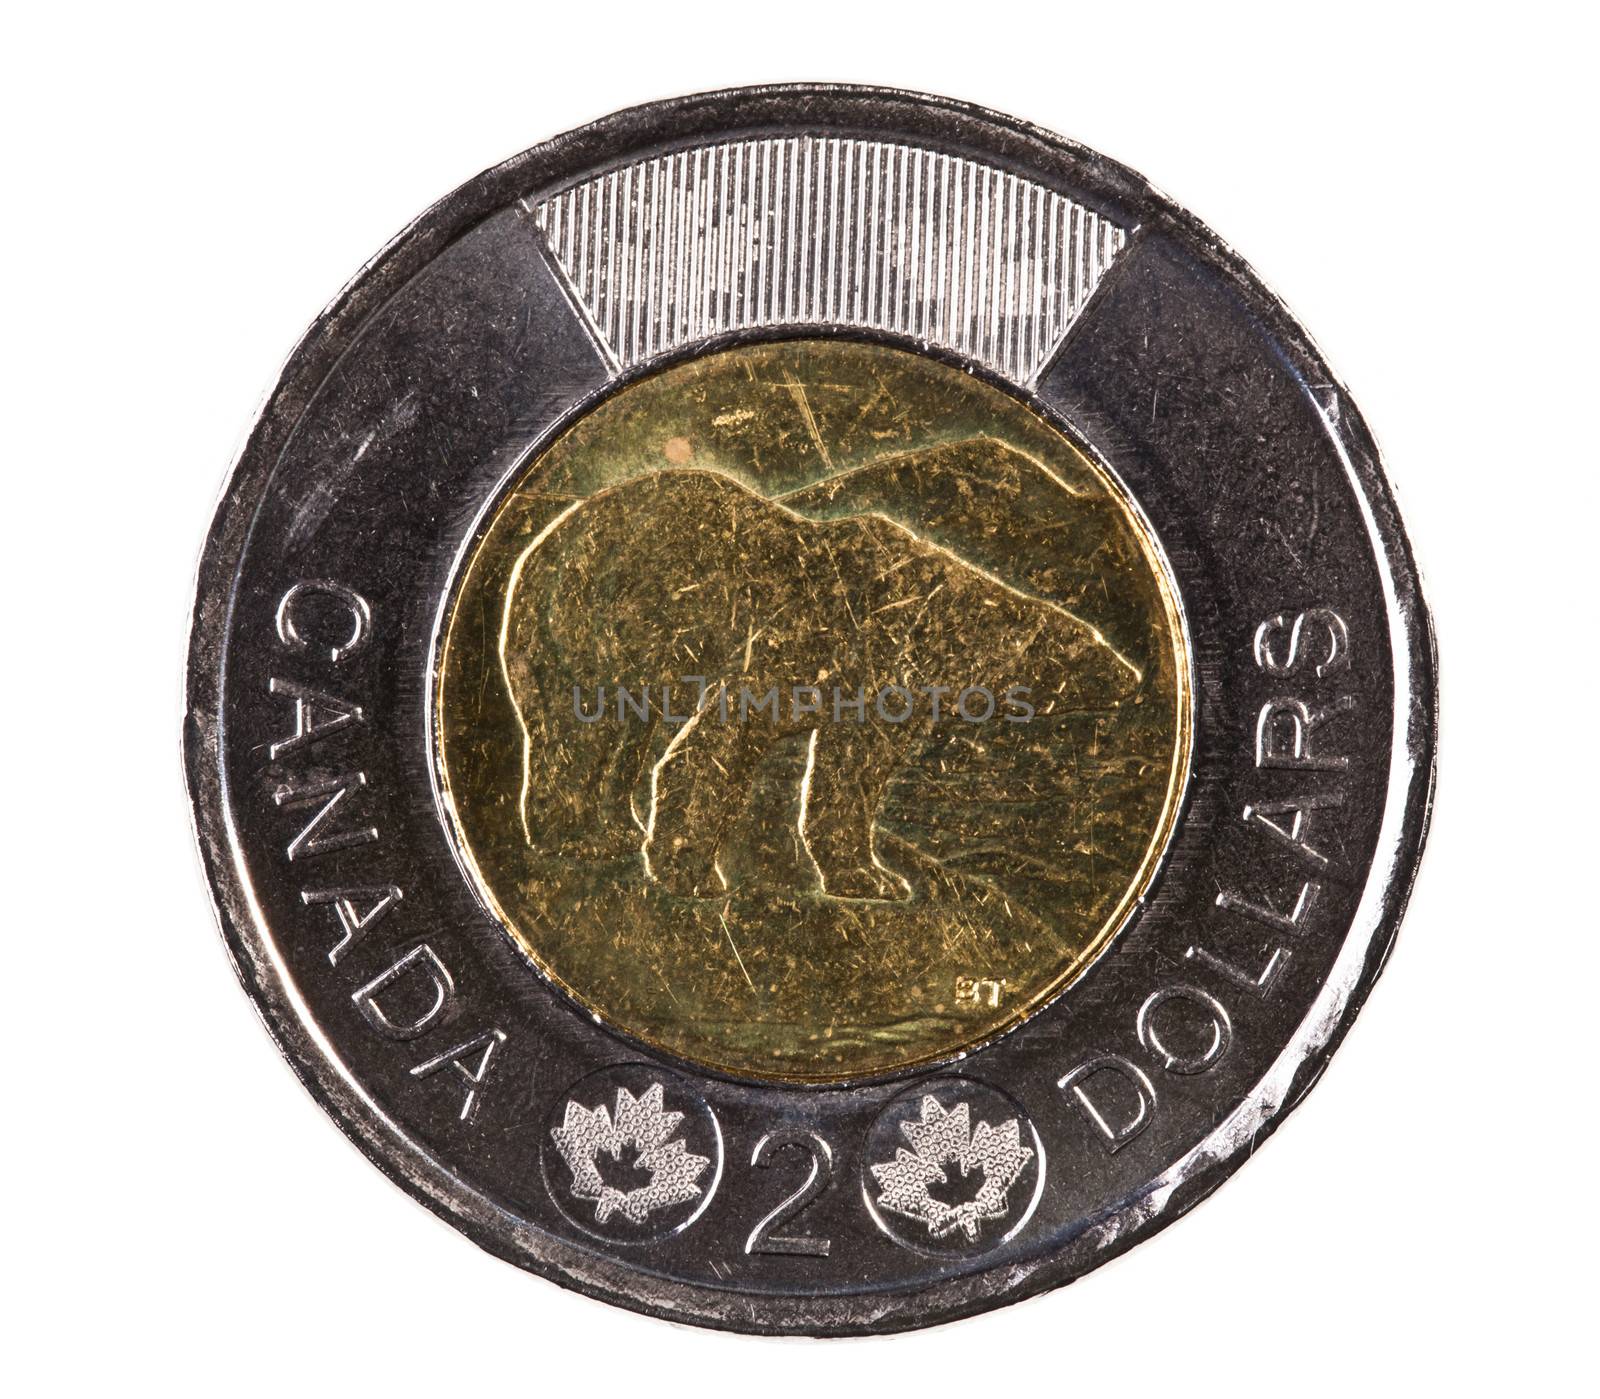 A brand new 2012 shiny Canadian two dollar coin with a polar bear